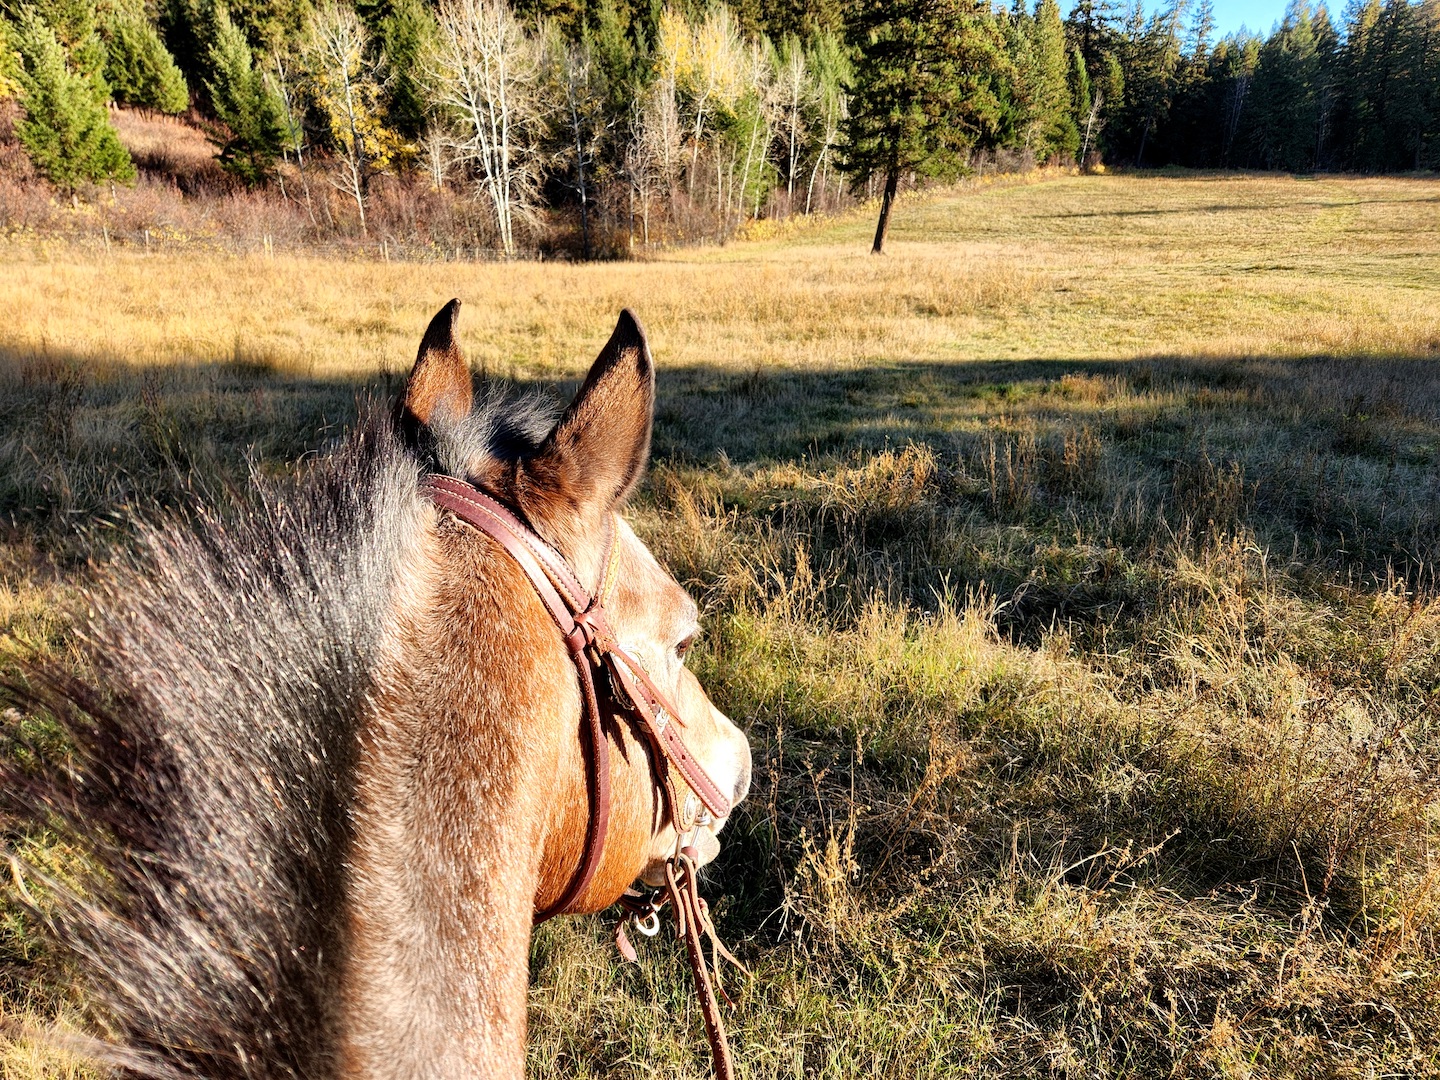 photo looking over an appaloosa's head, his ears forward, at a field with trees lining the distance